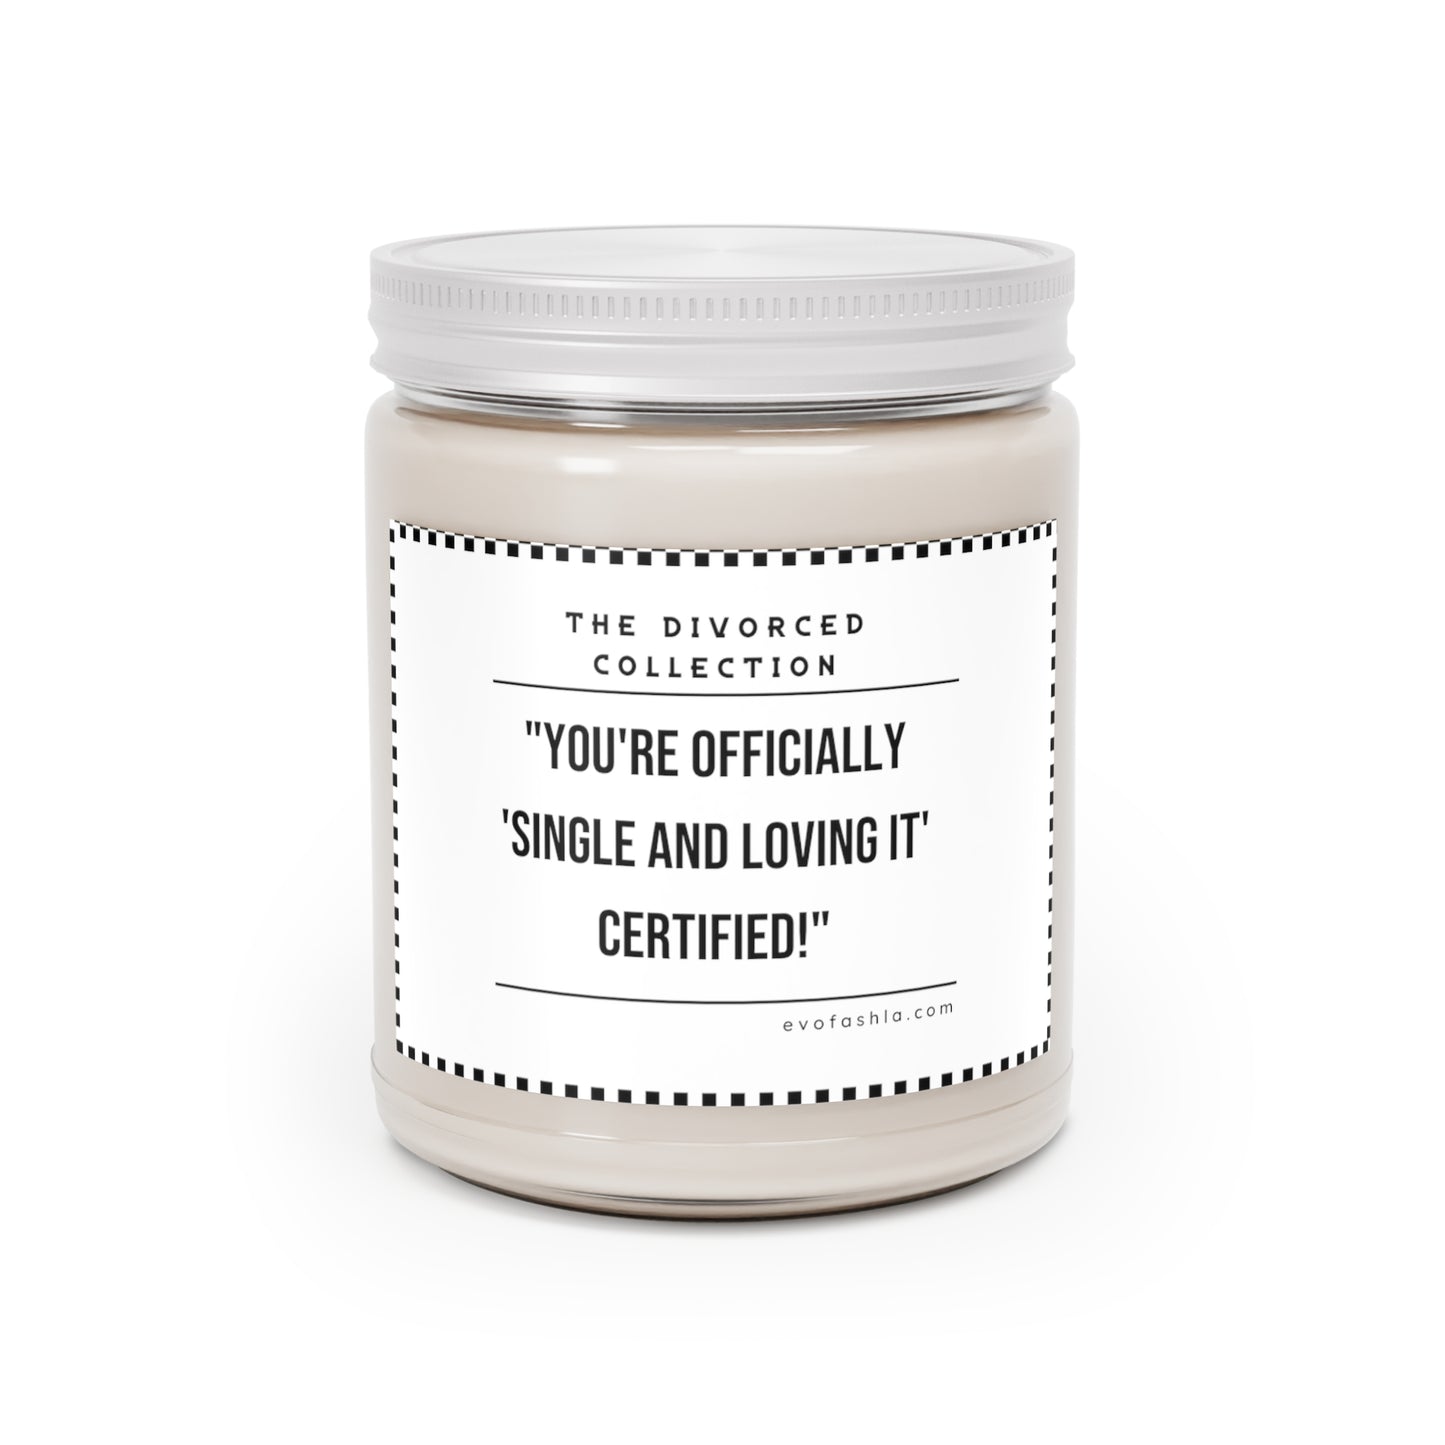 You're Officially Single And Loving It Certified Scented Candles, 9oz - EvoFash 